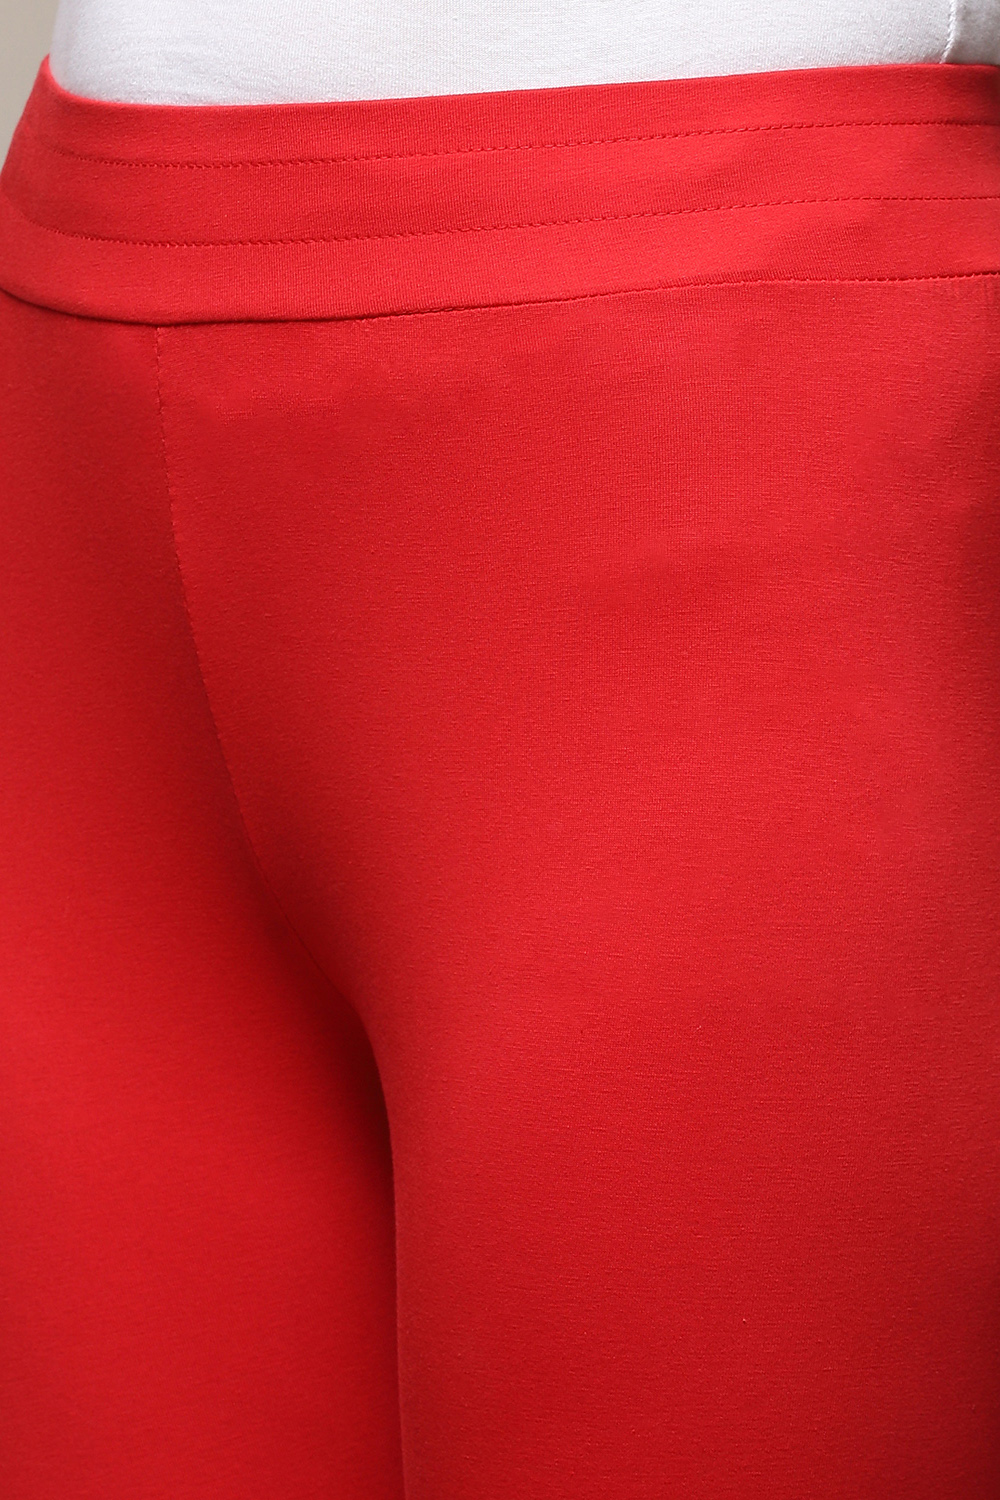 Carter's Leggings: Red Solid Bottoms - Size 6 Month